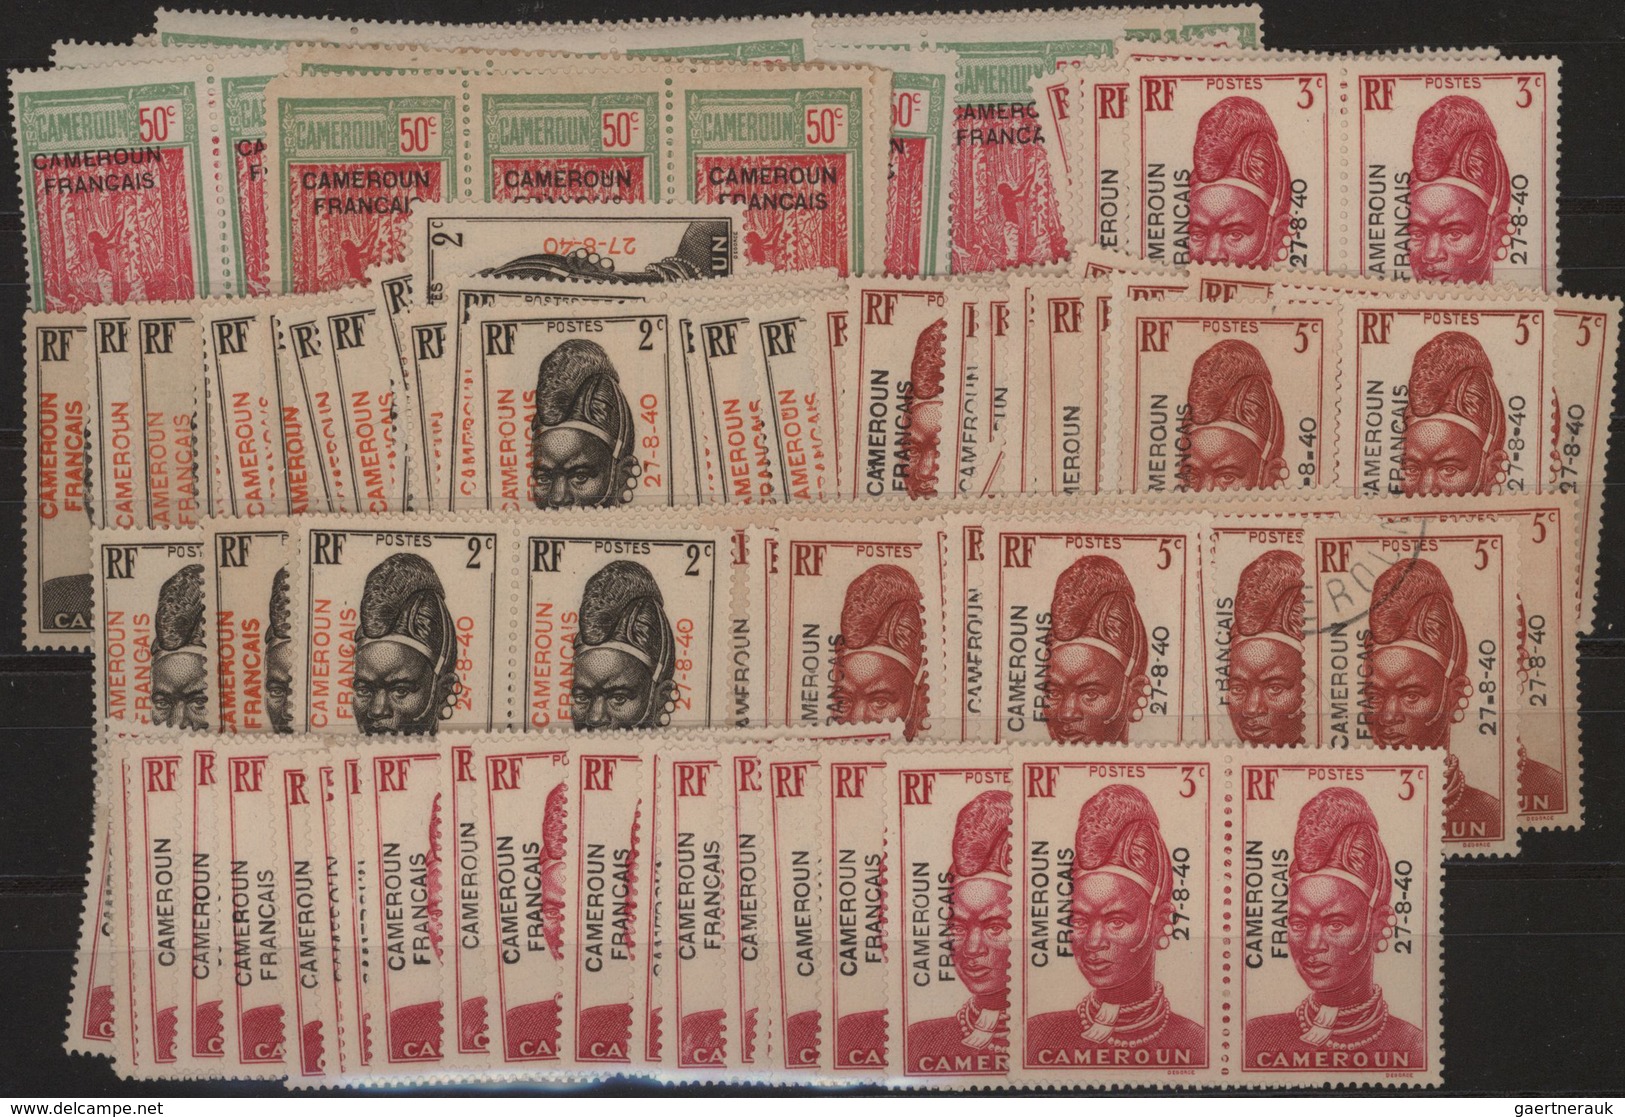 Kamerun: 1940, Yvert 202, 208-212 And 222 Overprint Issues: Approximately 600 Stamps Mainly Unused, - Camerún (1960-...)